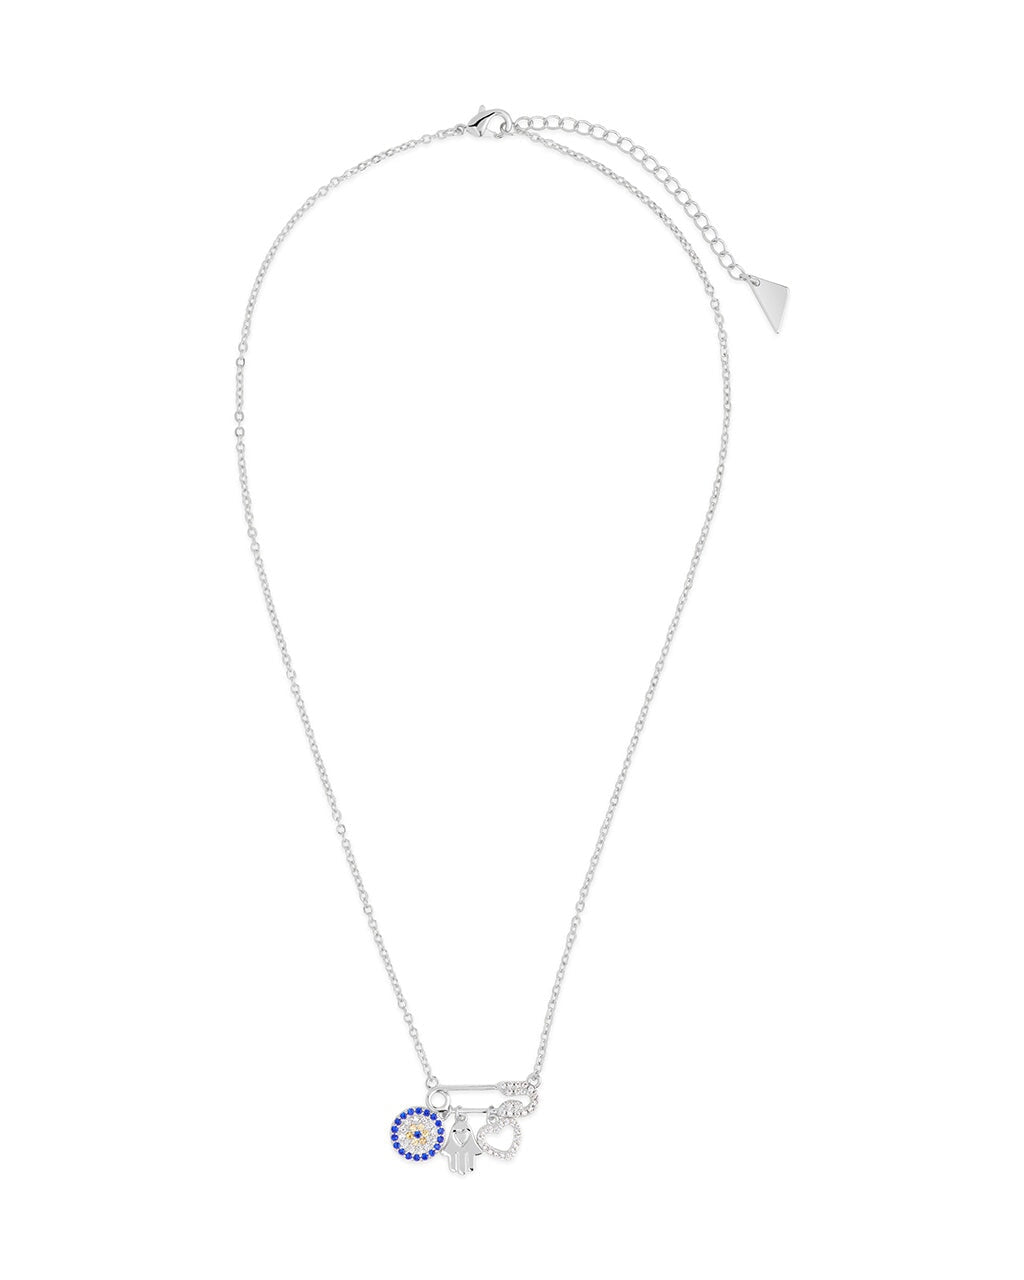 Kendra Protection Pendant Necklace Necklace Sterling Forever 